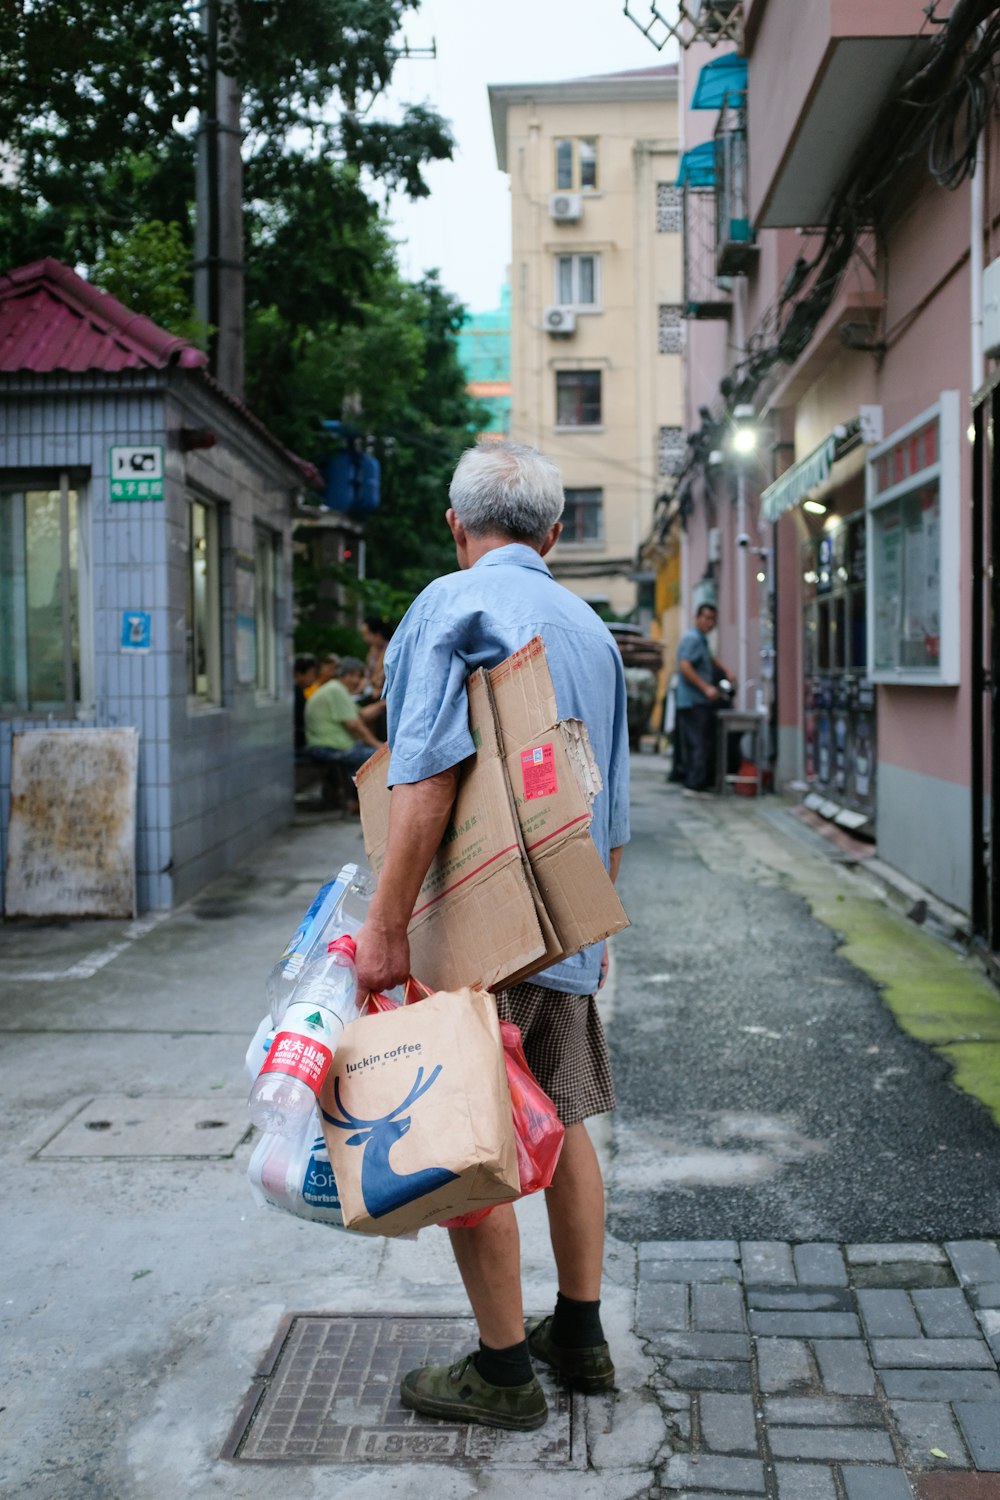 man carrying cardboard boxes